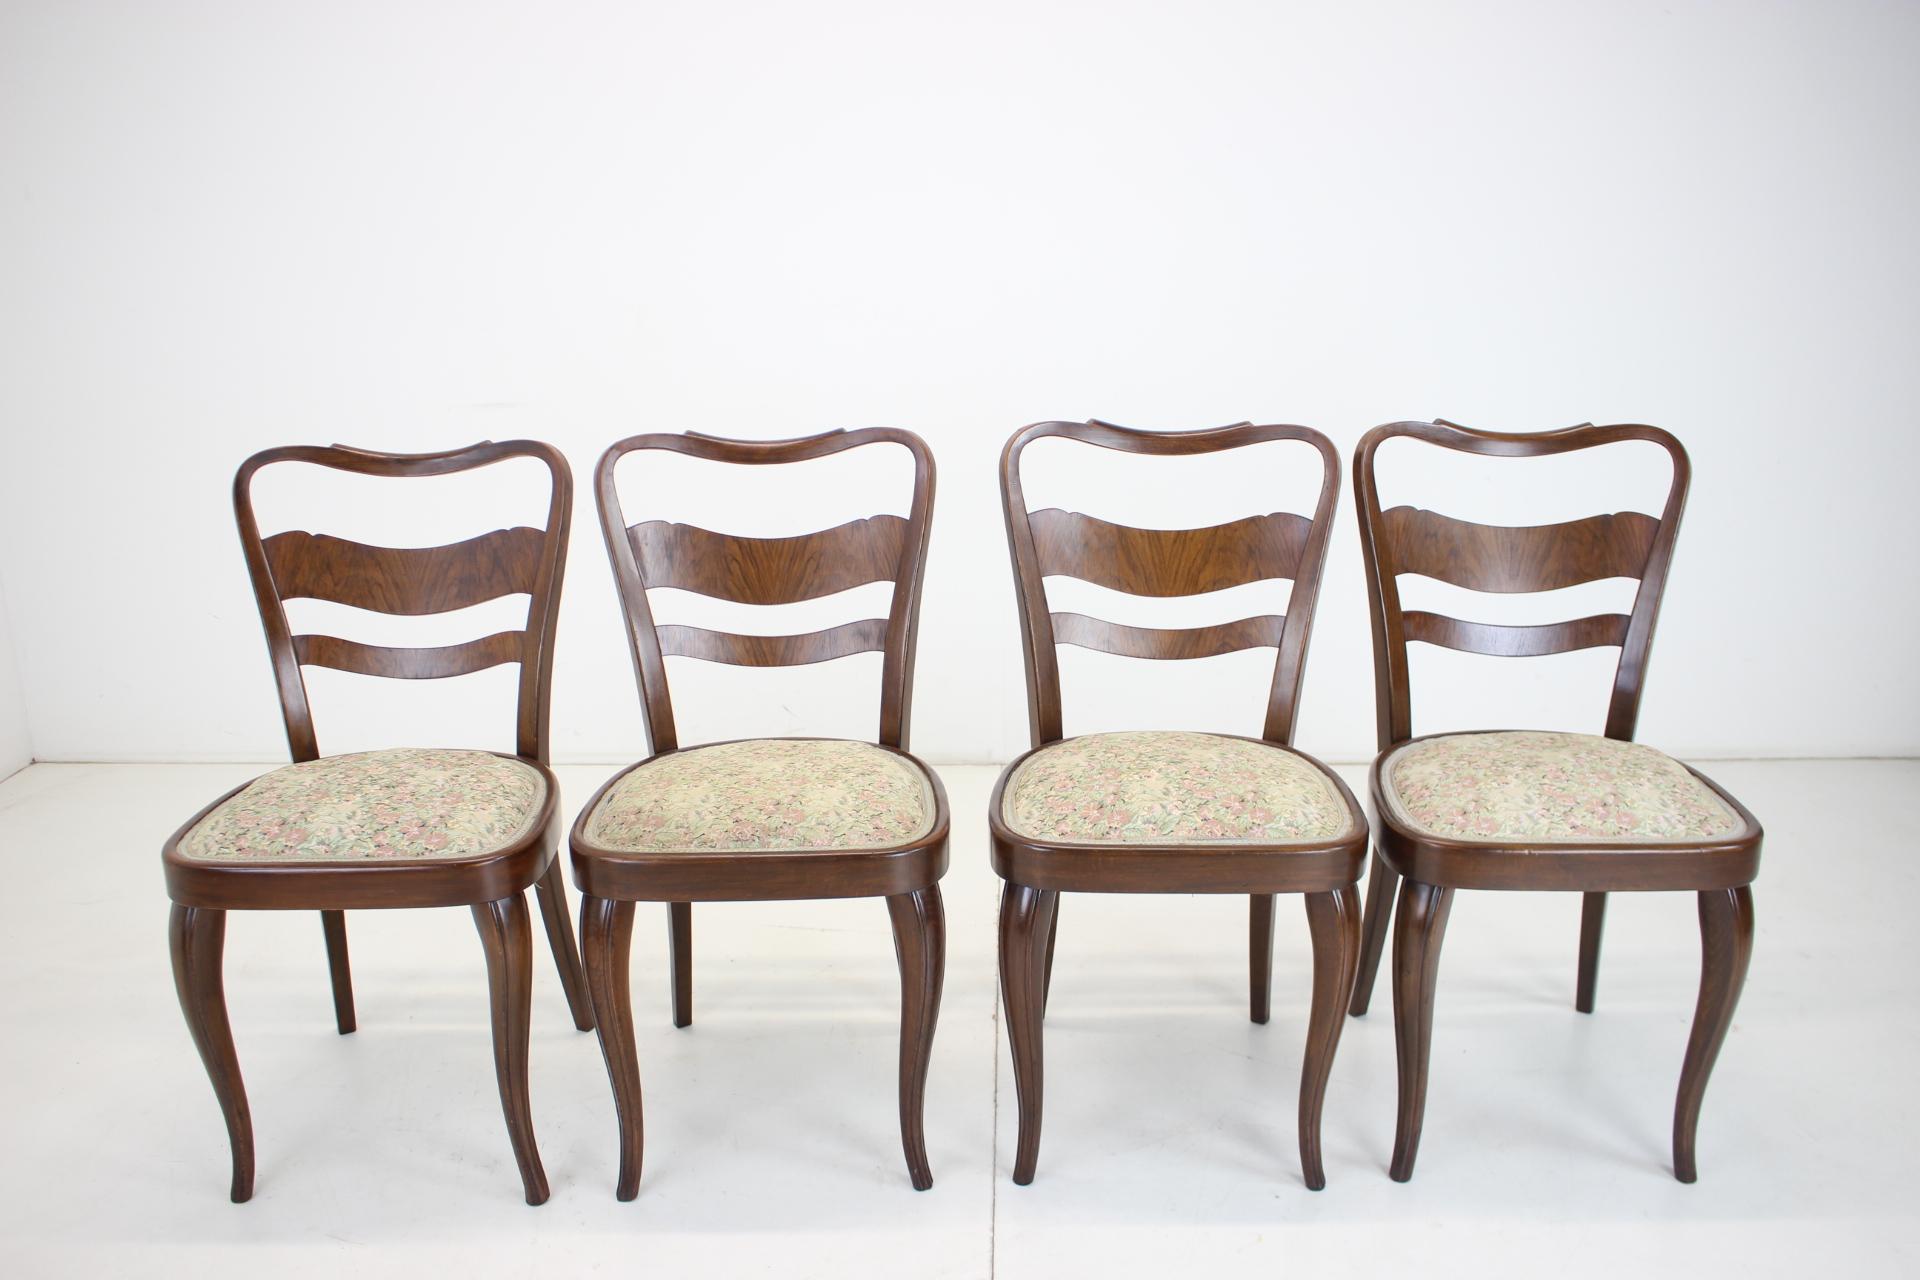 1940s Set of 4 Dining Chairs, Czechoslovakia For Sale 1